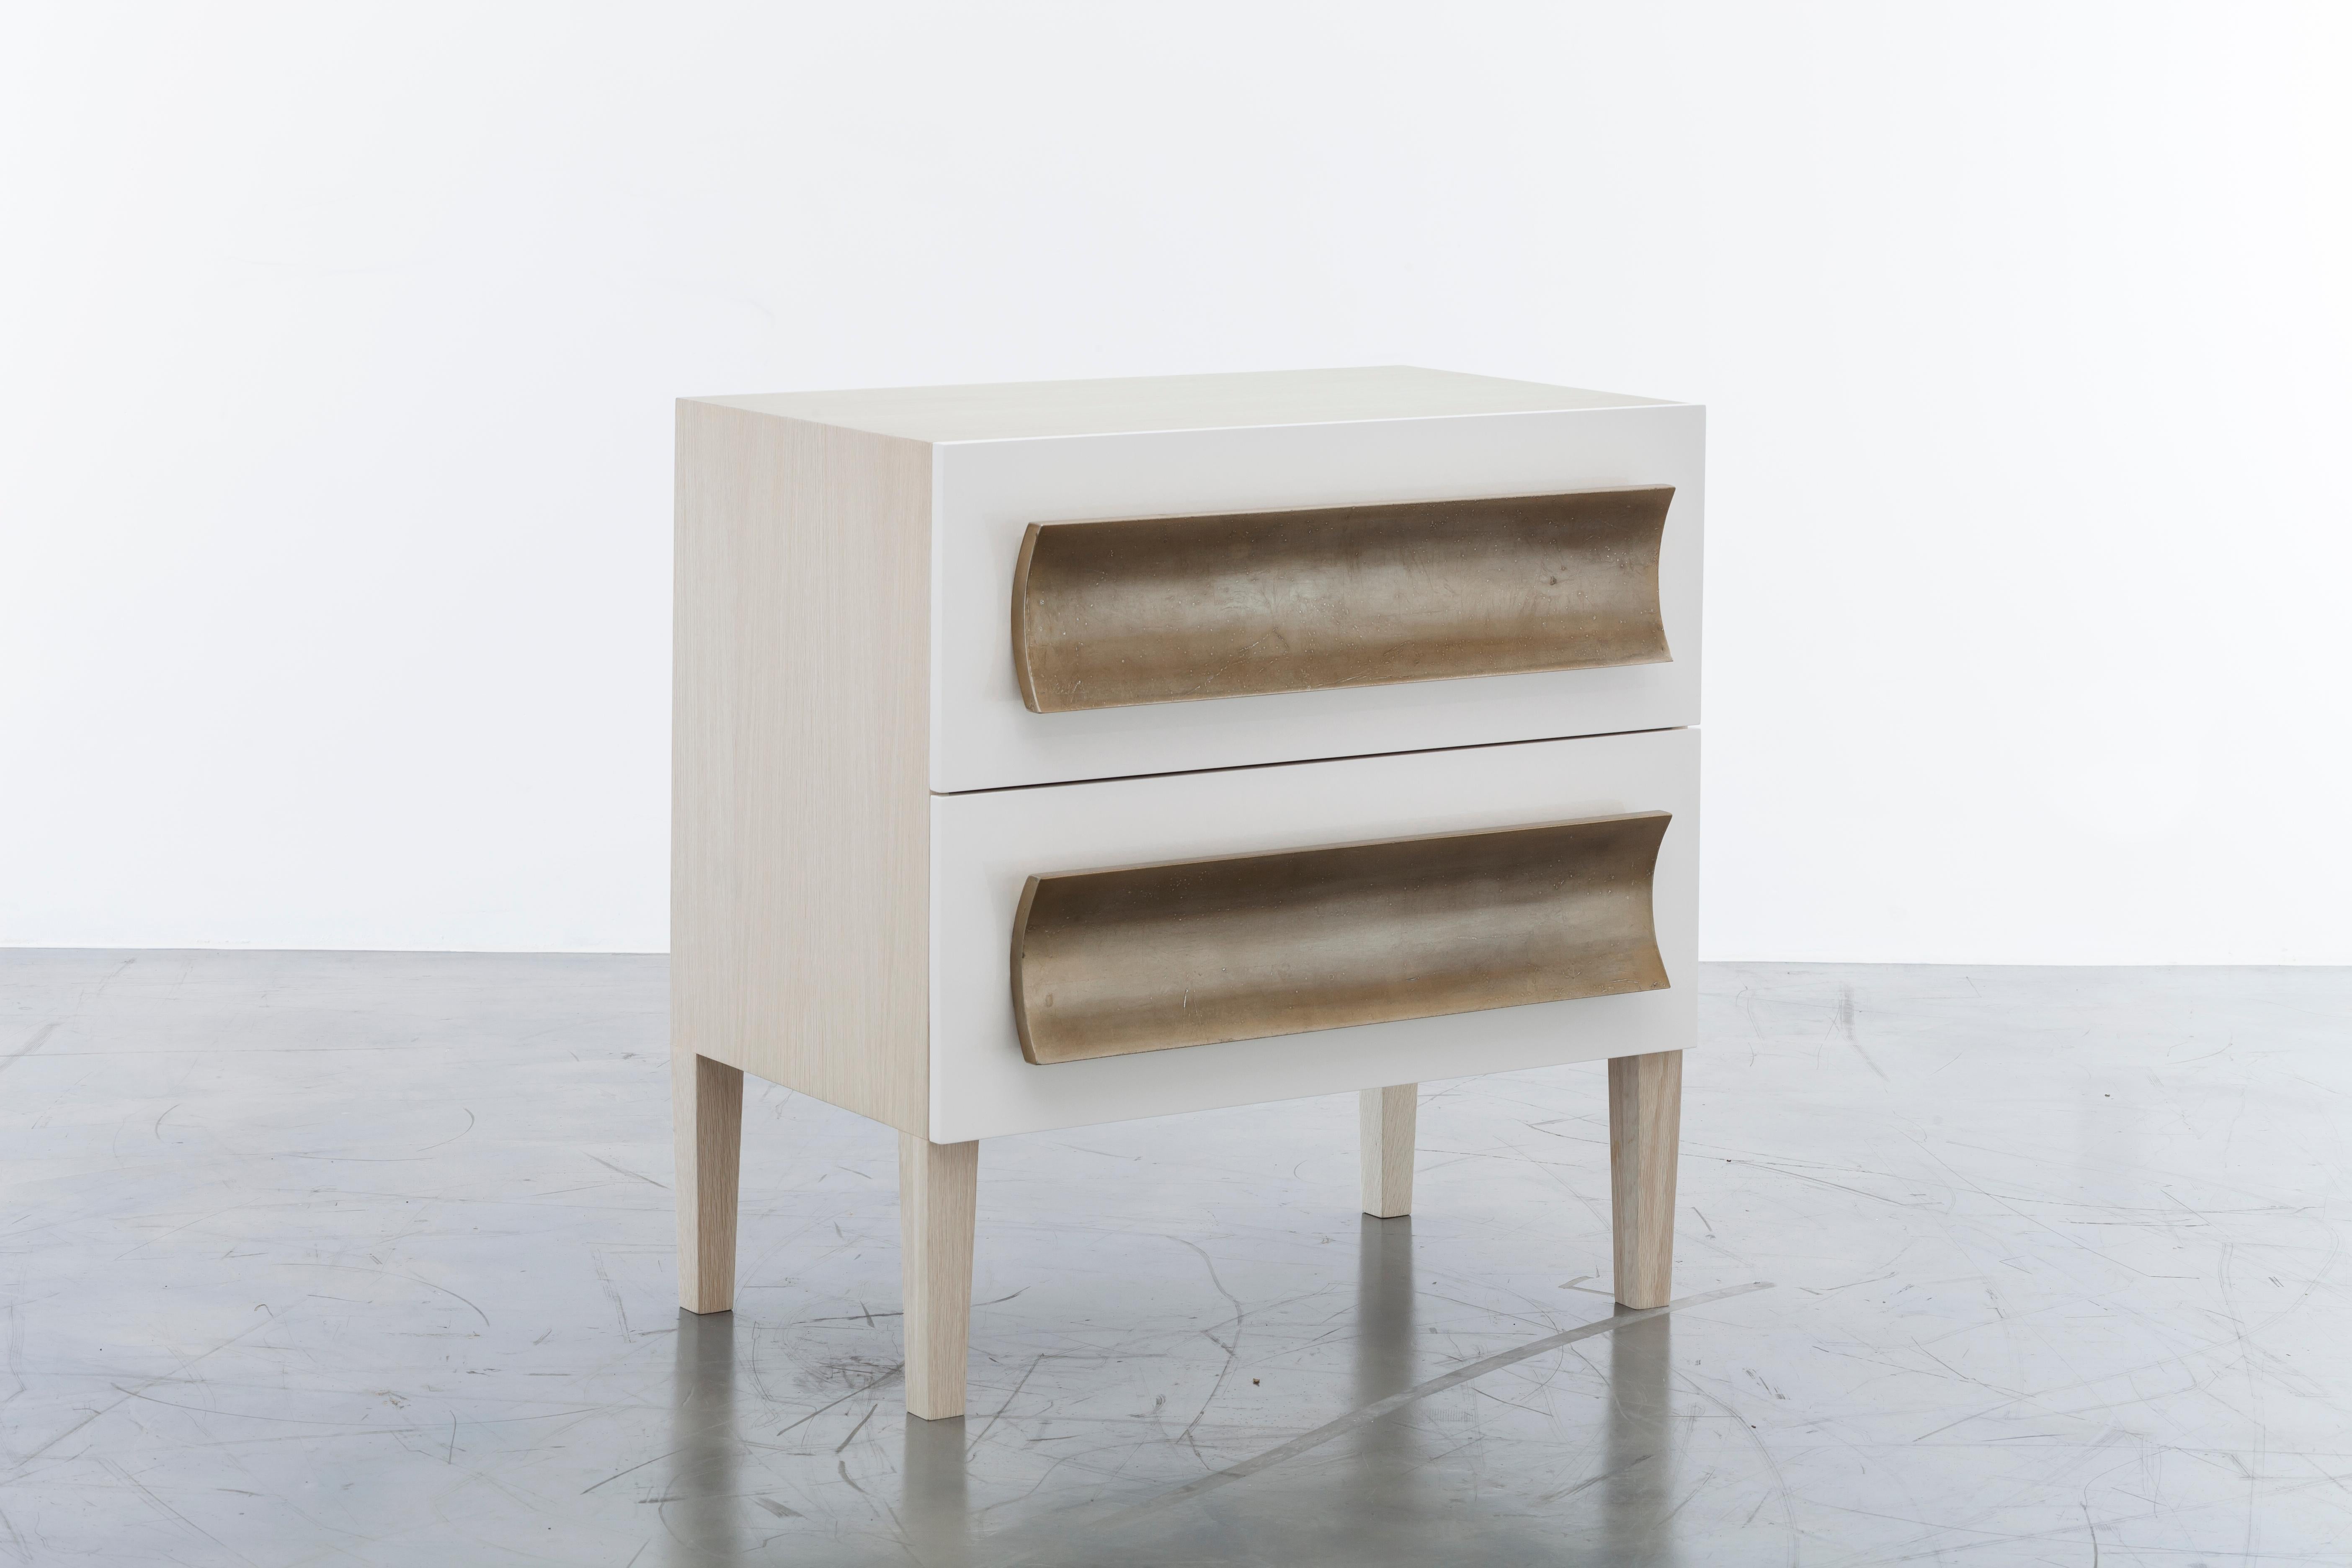 RECAMIER NIGHTSTAND - Modern Oak and Lacquer Body + Silver Leaf Hand-Carved Pull

The Recamier Nightstand is a beautifully designed piece of furniture that adds a touch of elegance and sophistication to any bedroom. The nightstand is crafted with an